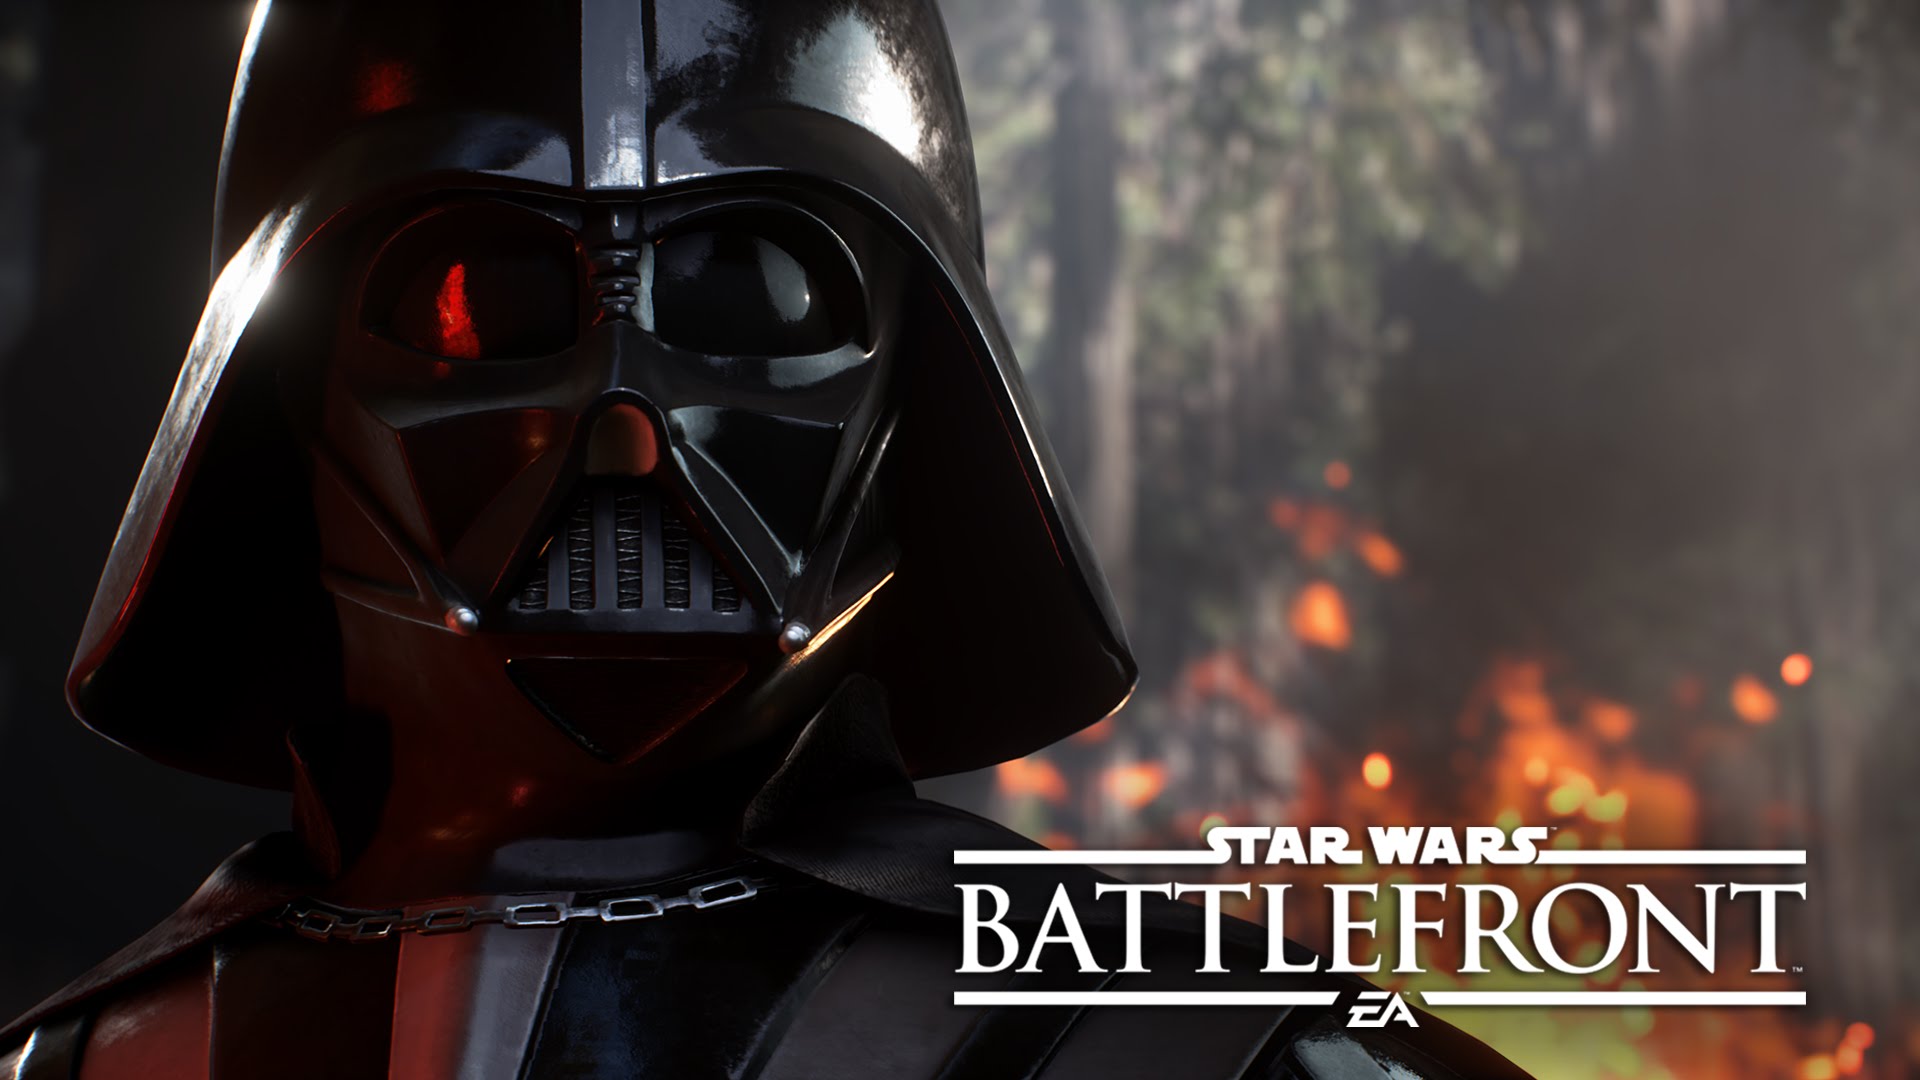 “Star Wars Battlefront” Has a Season Pass - $50- That's Almost a Full Game